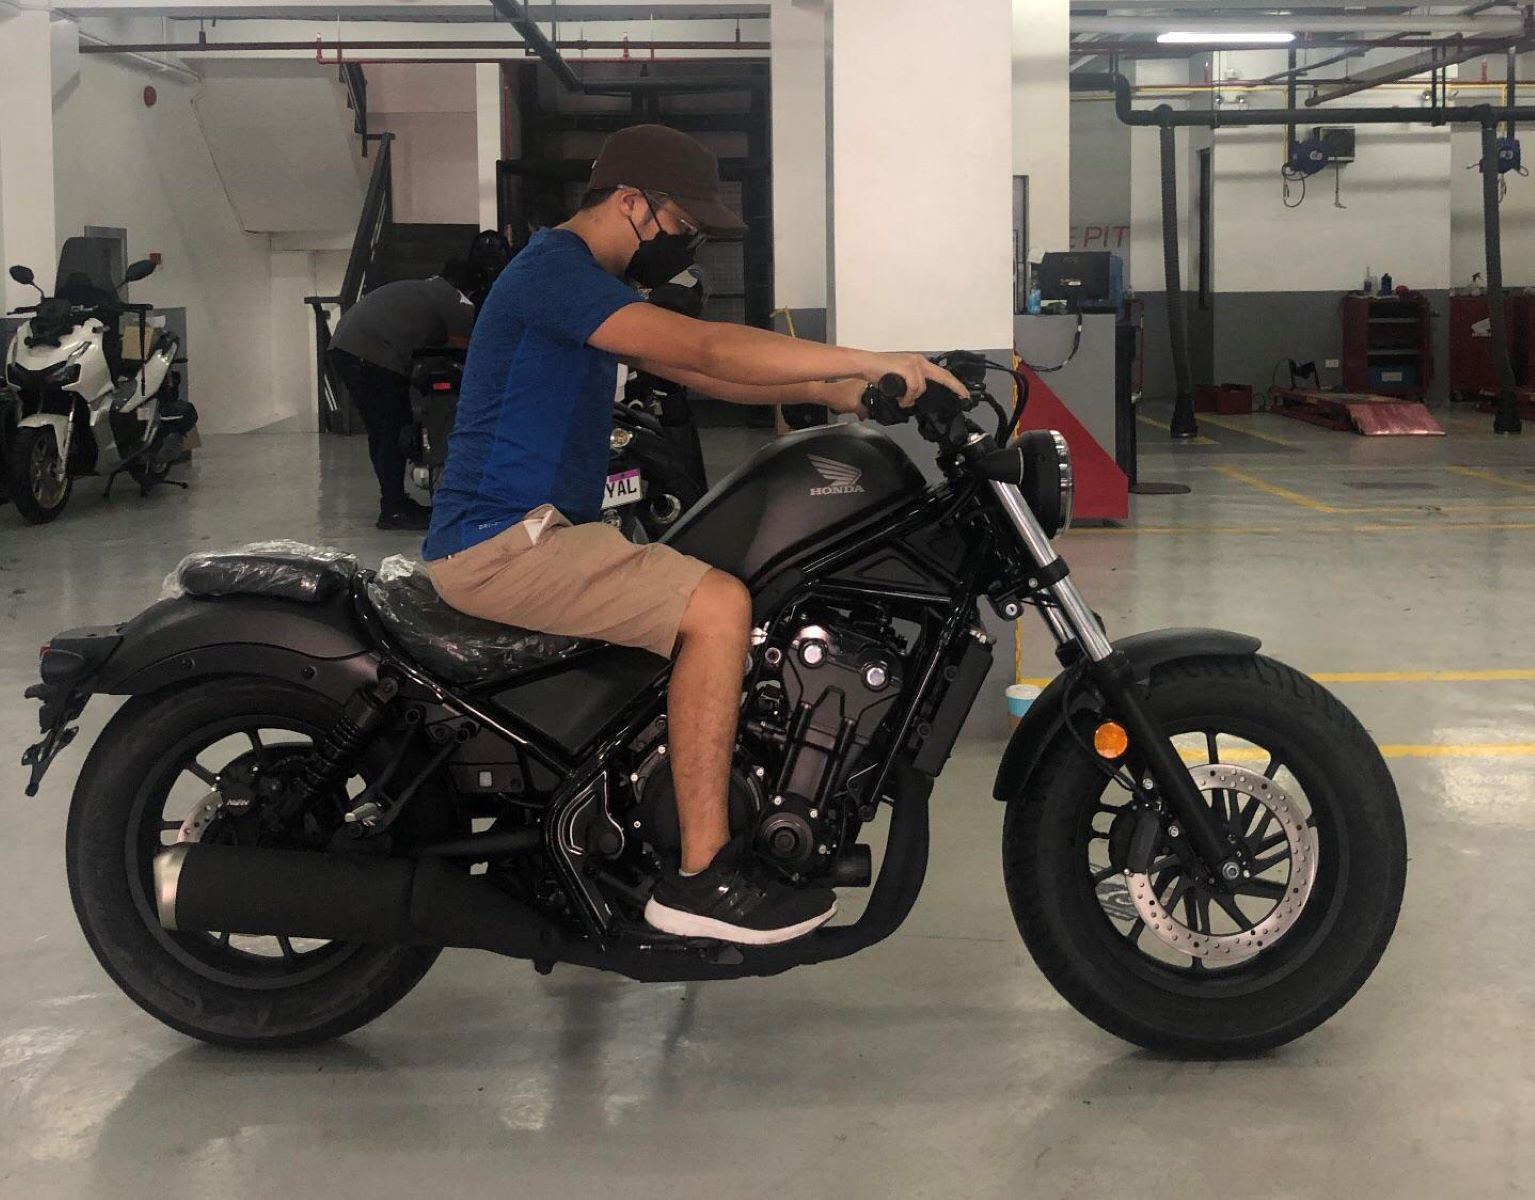 The Perfect Beginner Motorcycle For A 5'10, 240 Lb Rider!